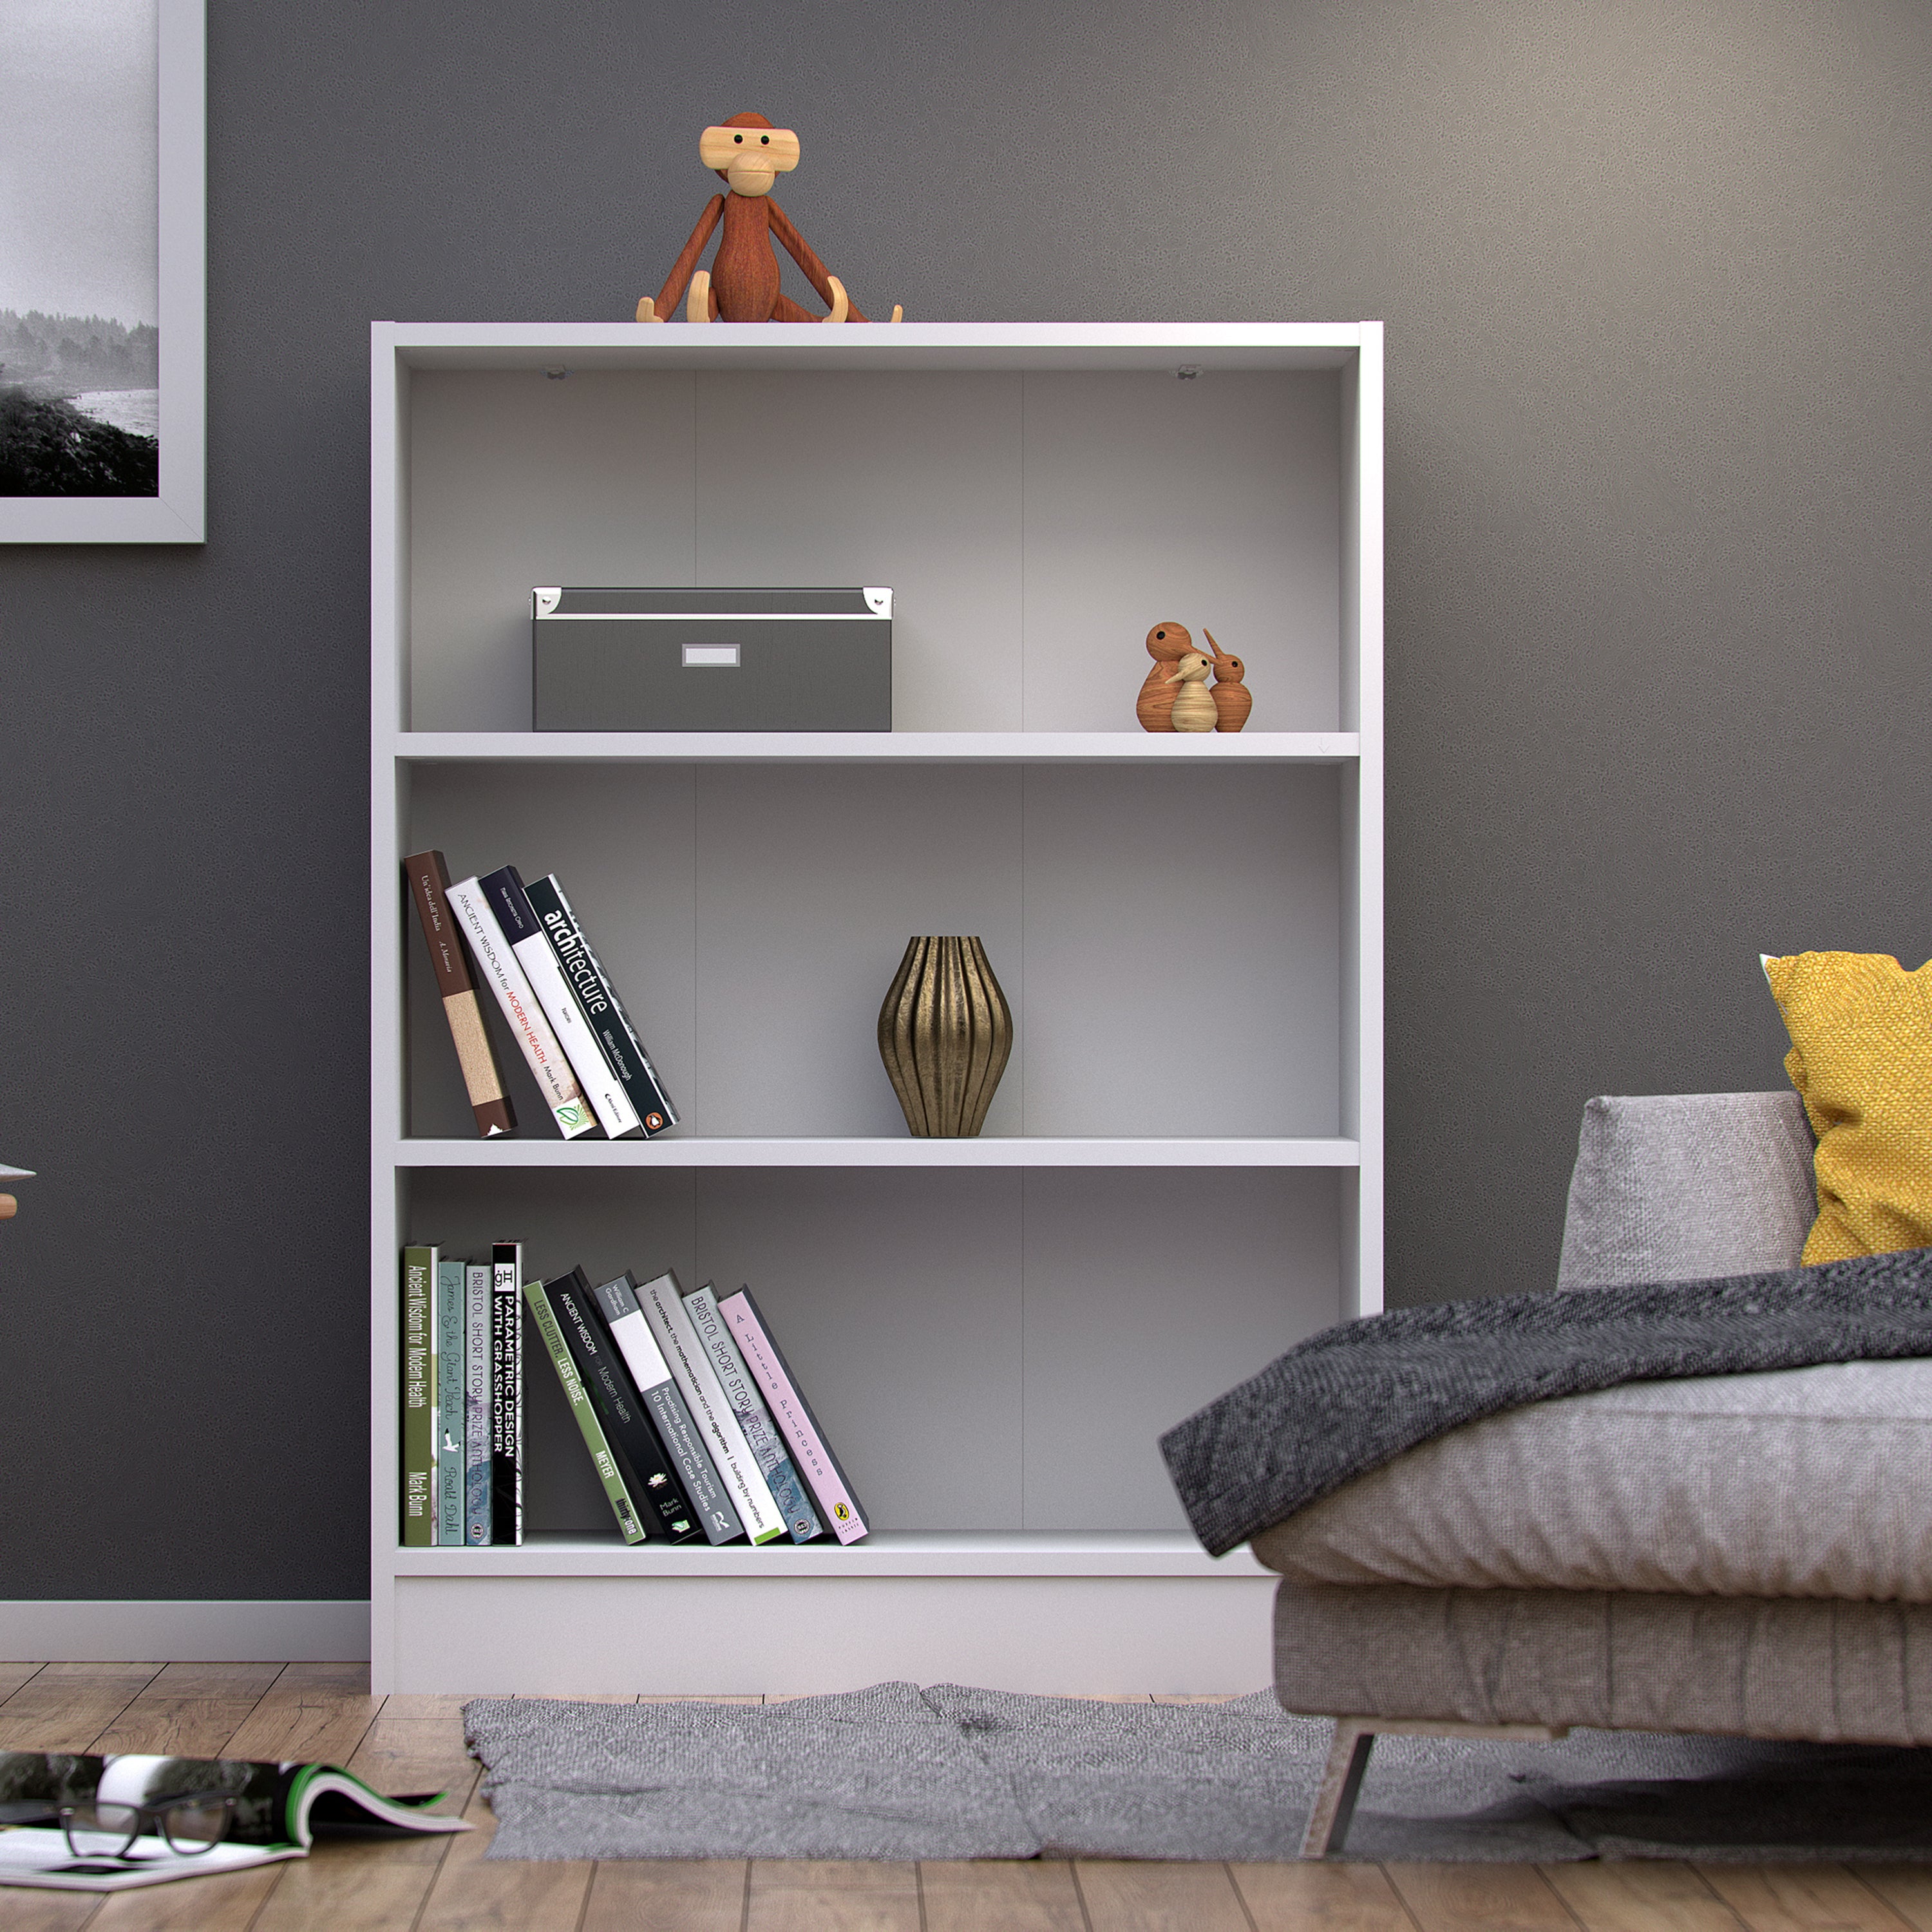 Basic Low Wide Bookcase (2 Shelves) in White